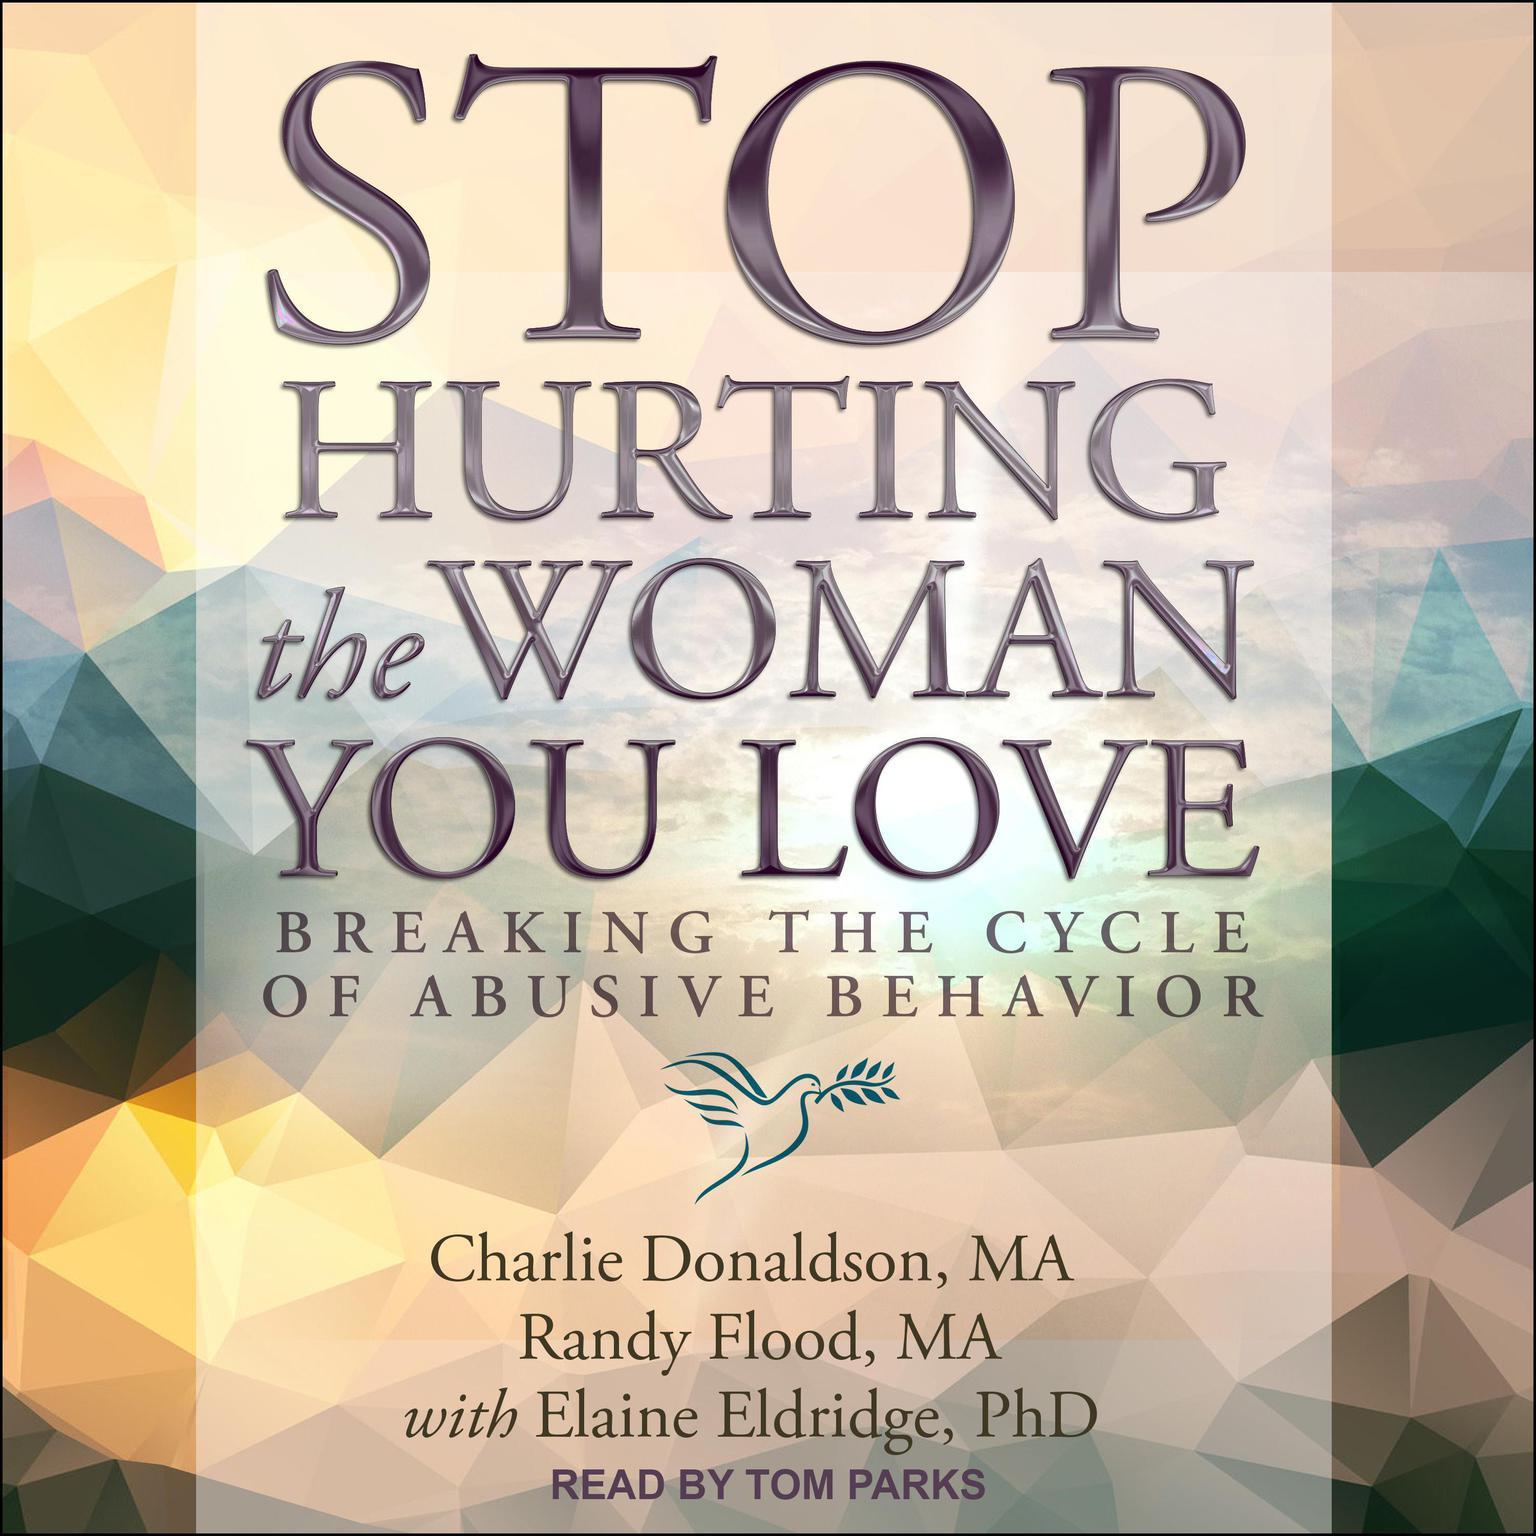 Stop Hurting the Woman You Love: Breaking the Cycle of Abusive Behavior Audiobook, by Charlie Donaldson